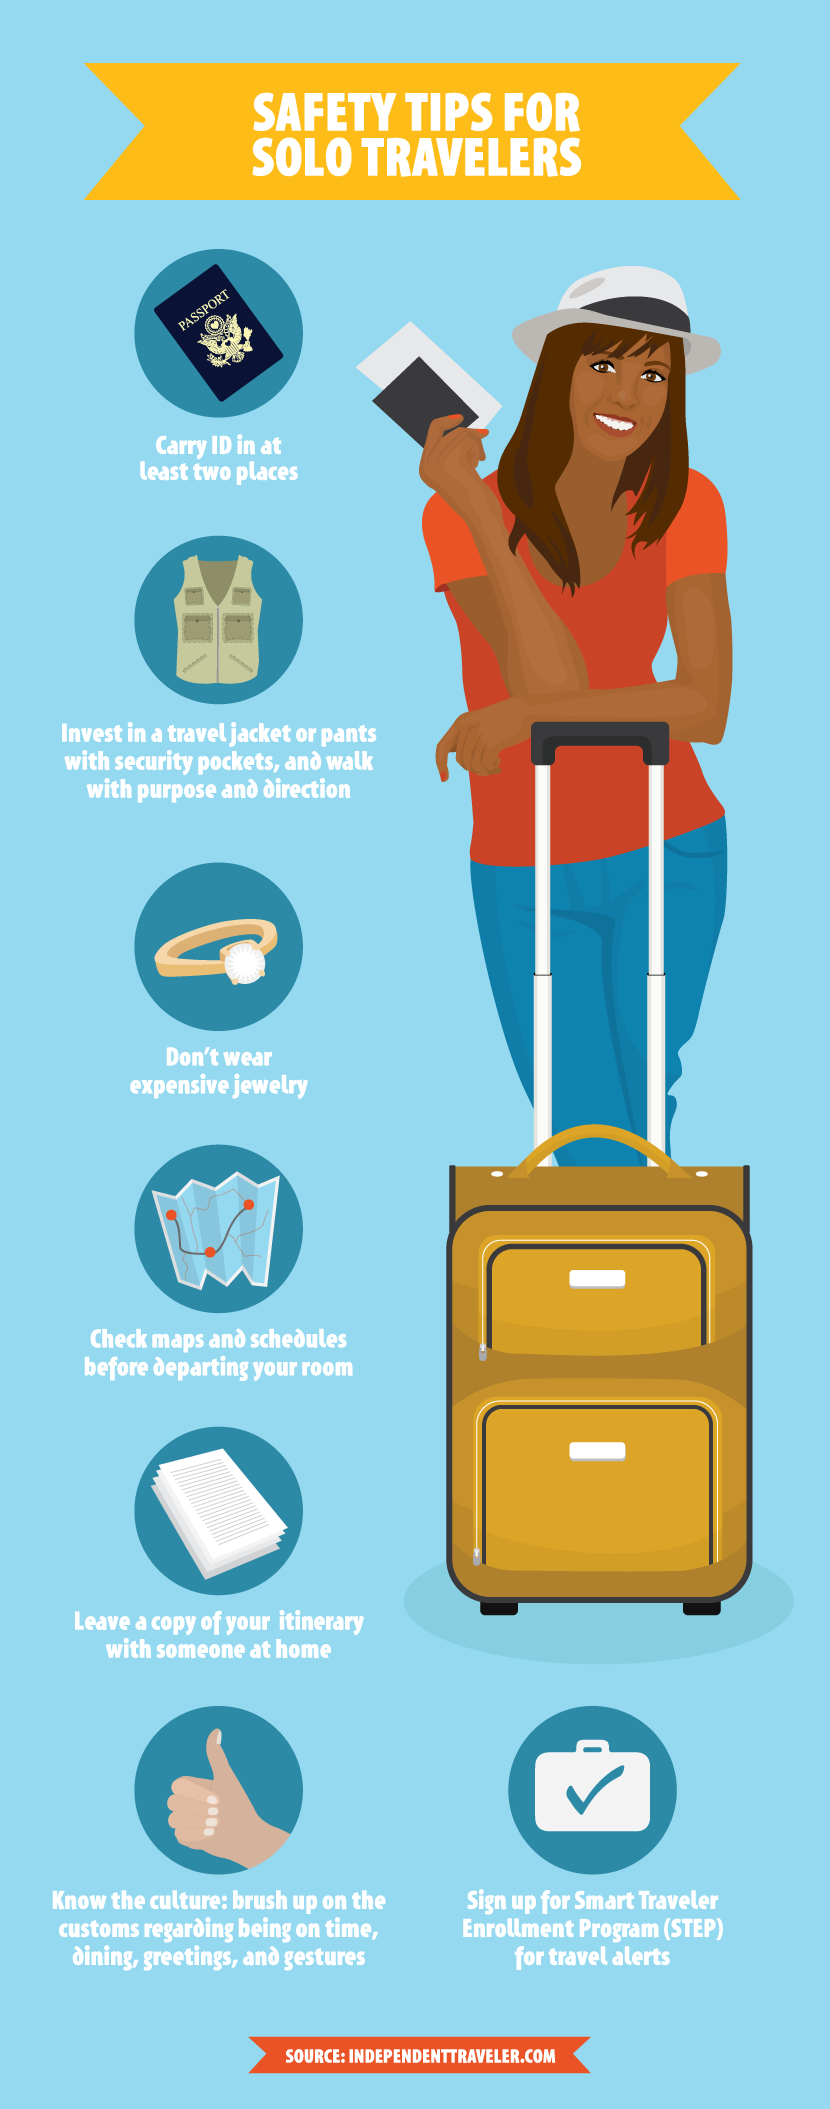 Safety Tips For Solo Travelers - Benefits of Traveling Solo